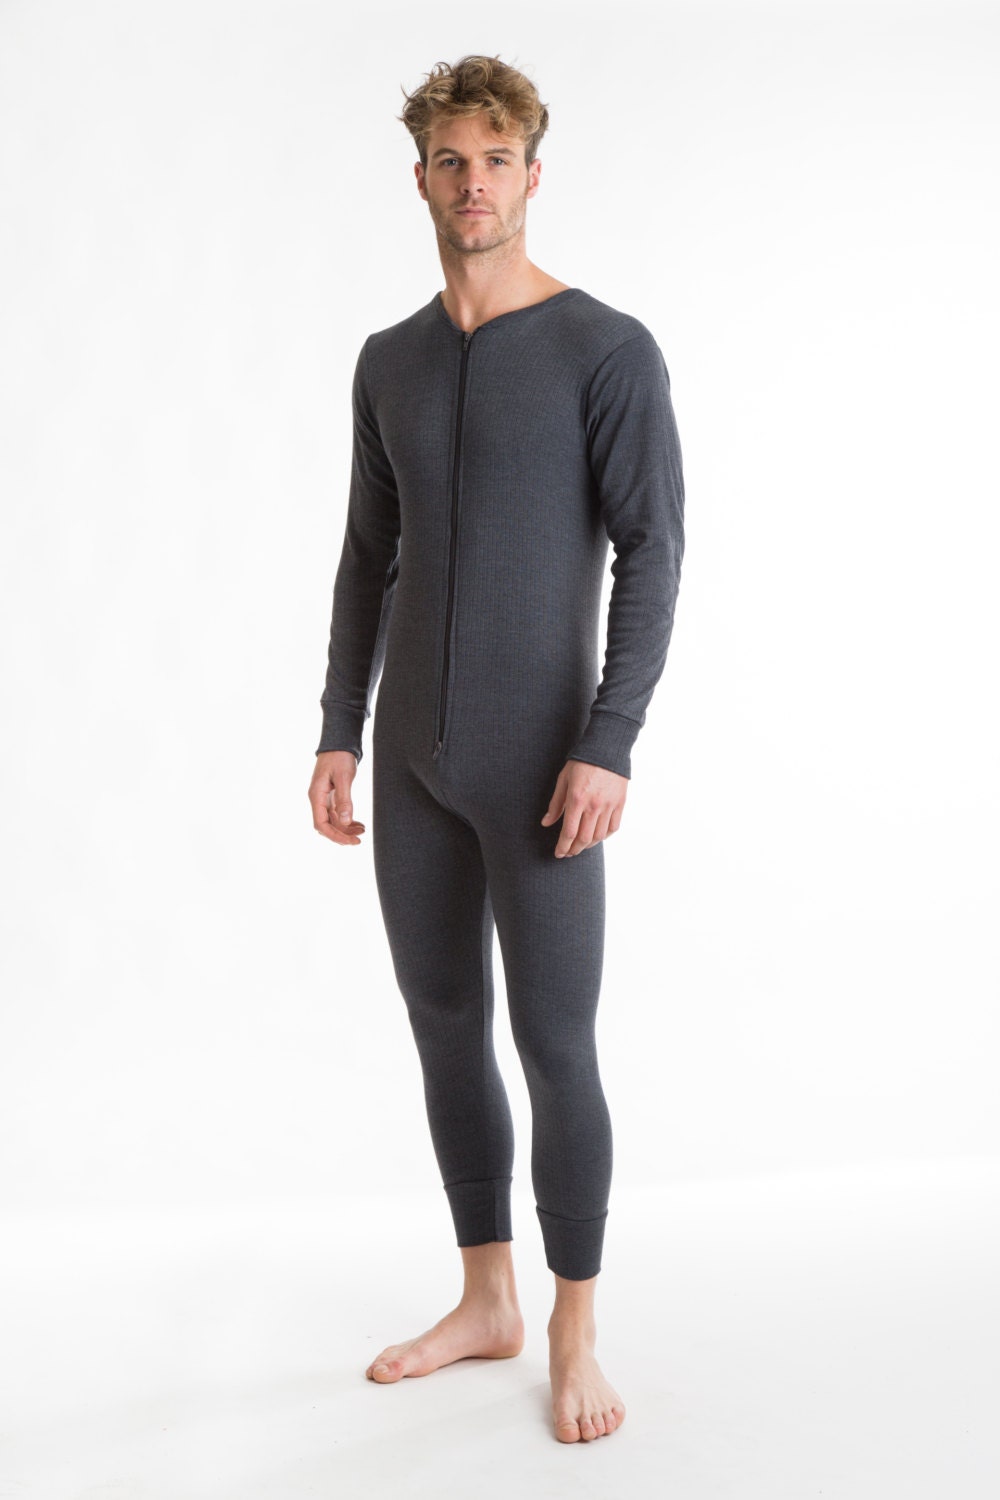 OCTAVE® Mens Thermal Underwear All in One Union Suit / Thermal Body Suit -   Canada